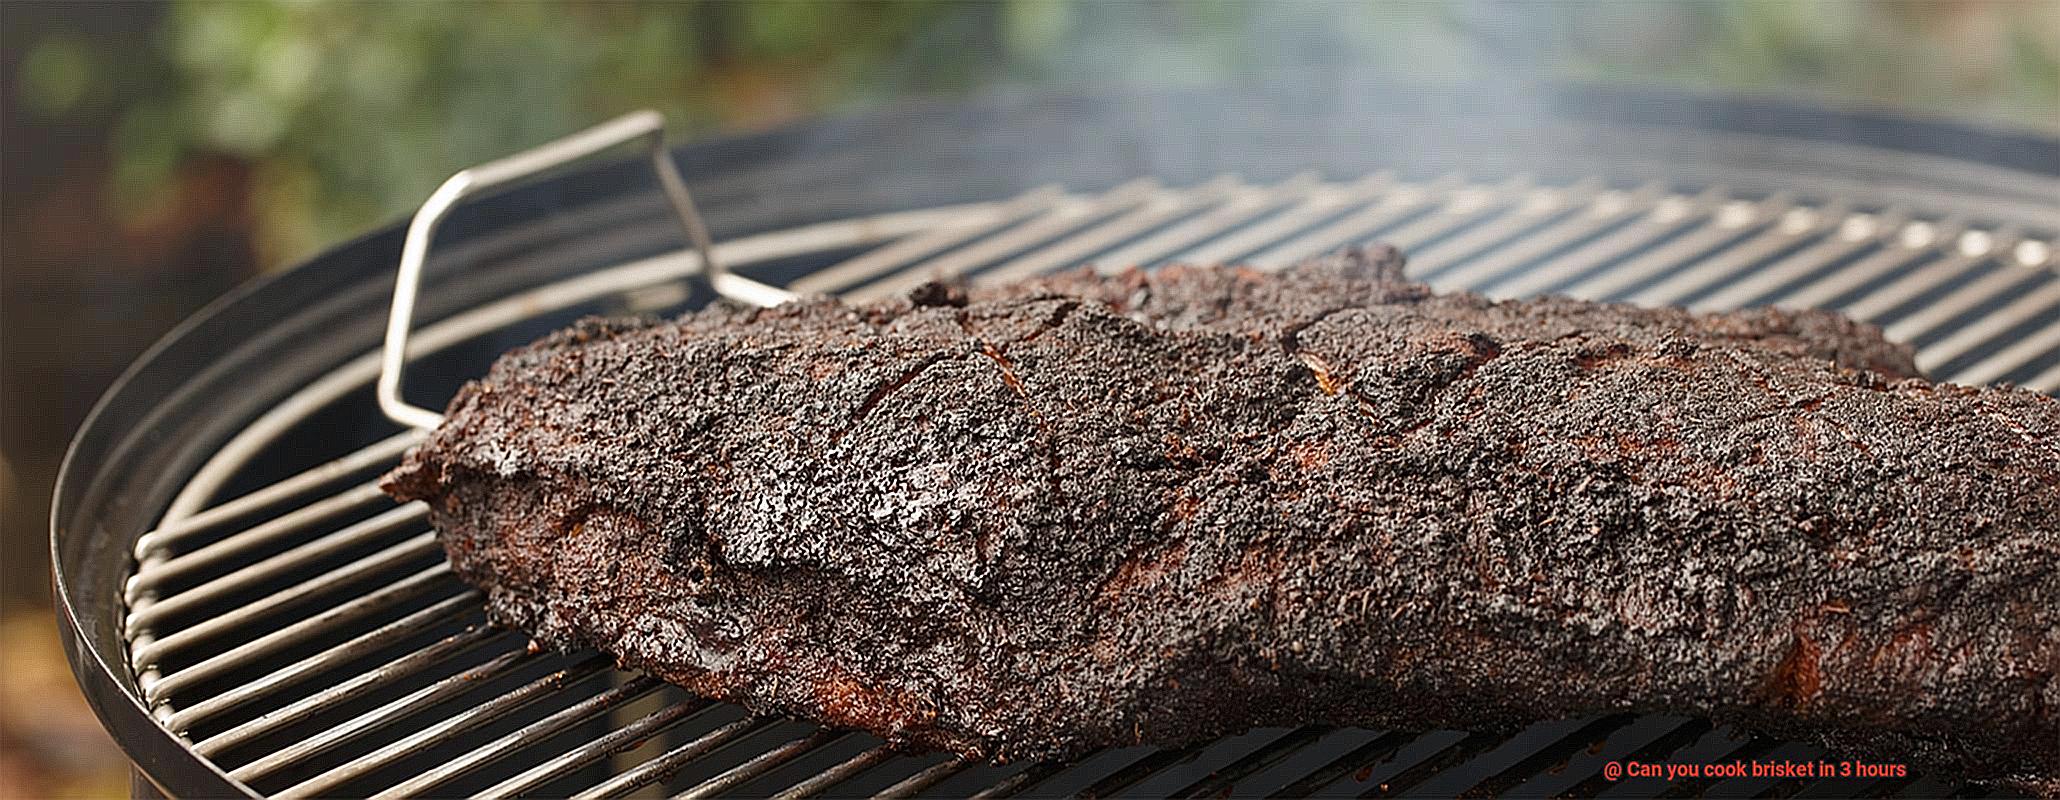 Can you cook brisket in 3 hours-5